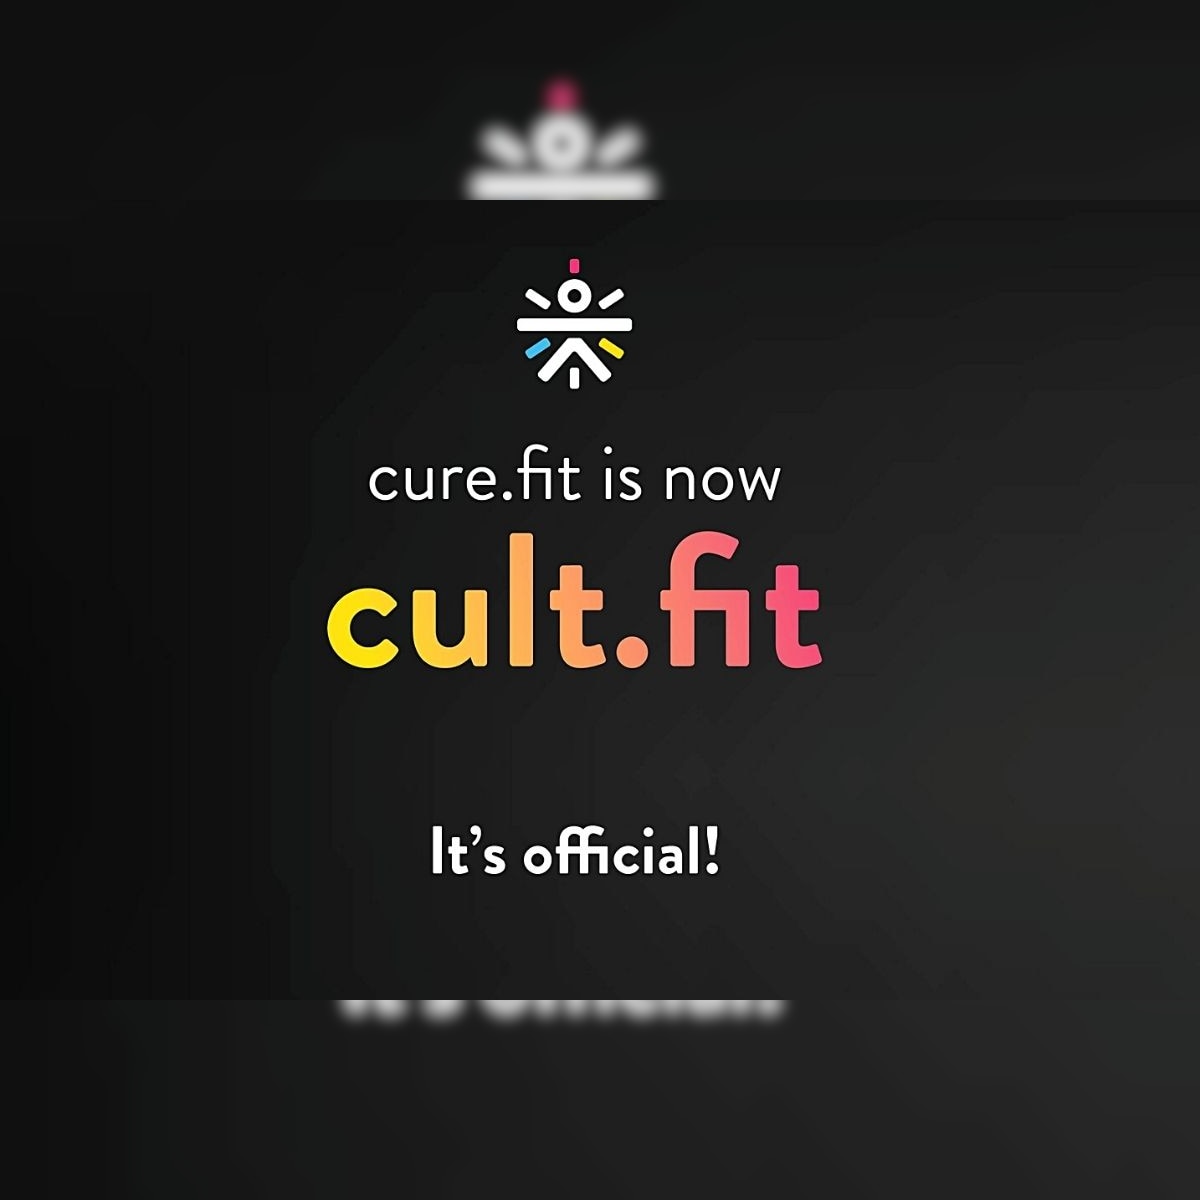 Indian Health App Cure Fit Renamed To Cult Fit After Its Flagship Fitness Vertical